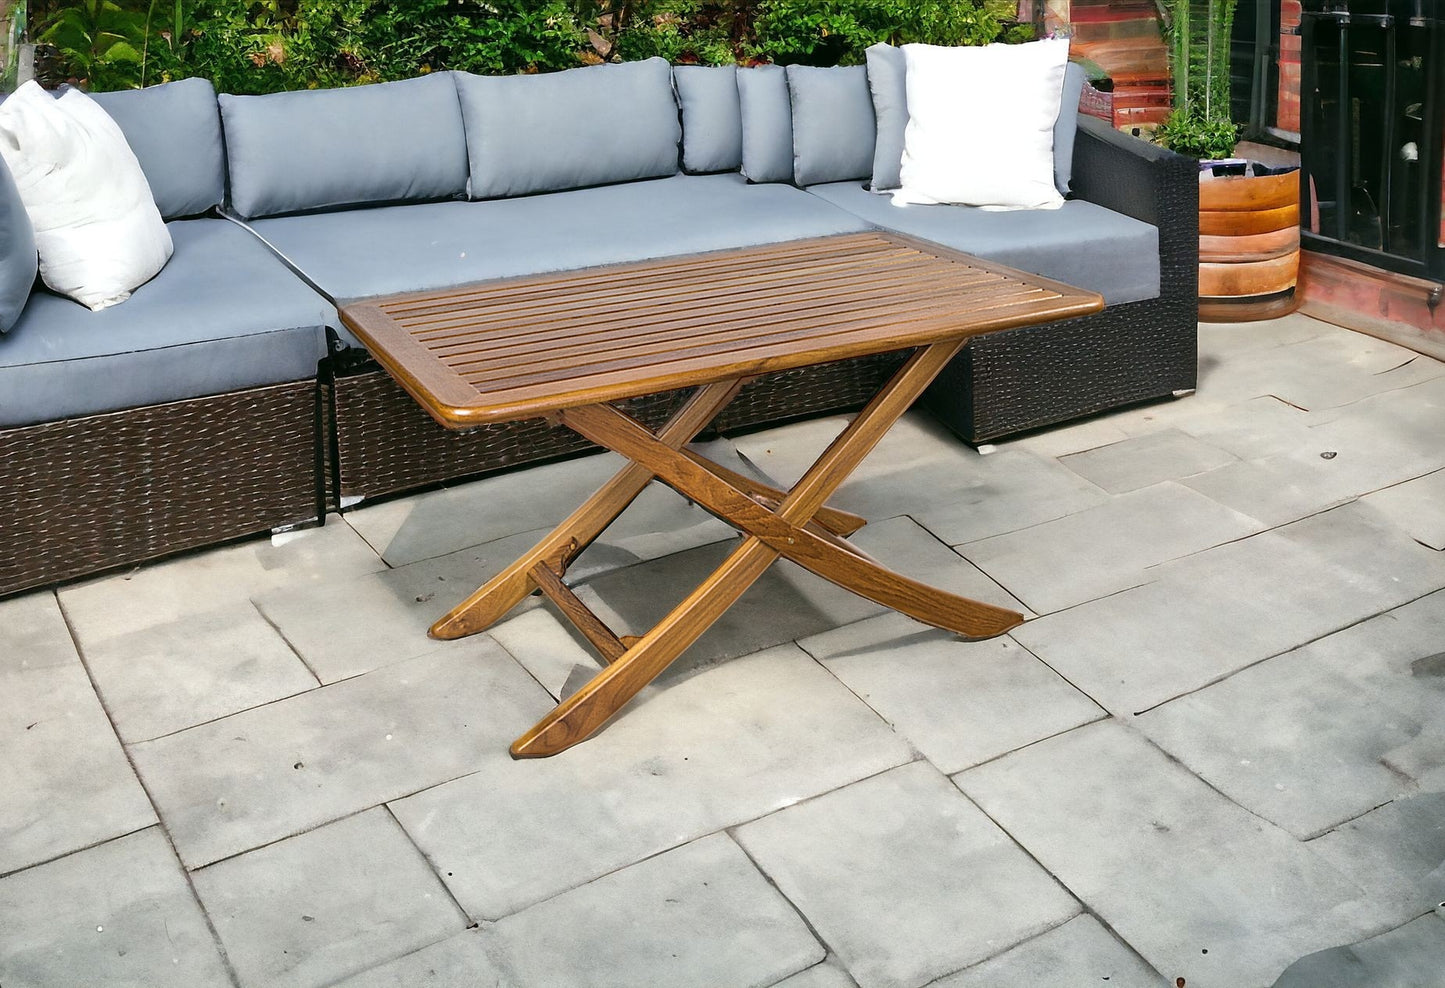 43" Brown Solid Wood Folding Outdoor Picnic Table